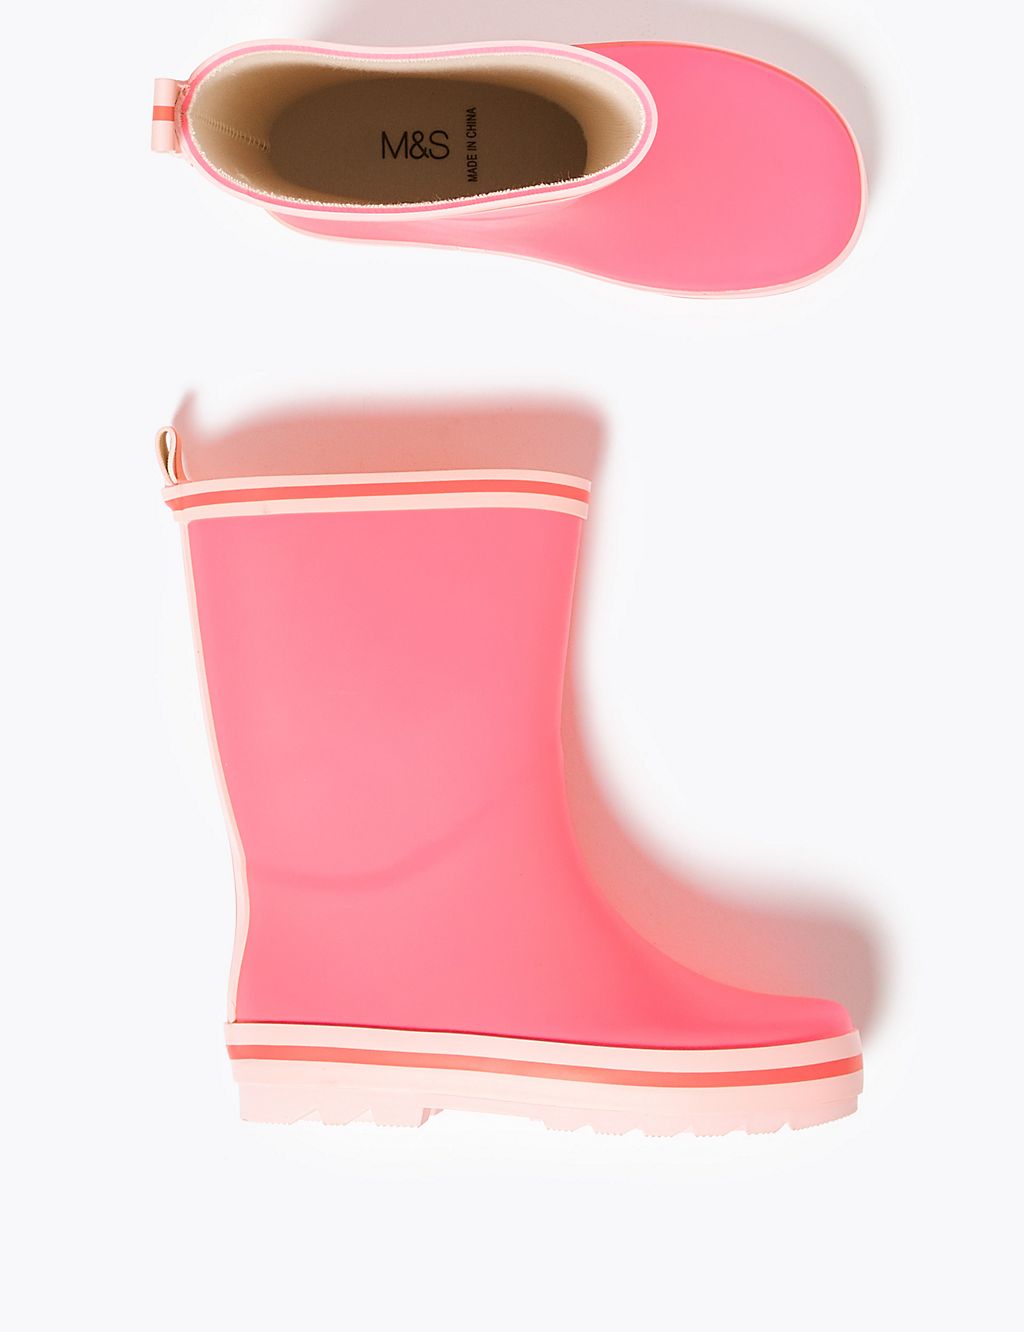 Kids' Wellies (13 Small - 6 Large) 1 of 5